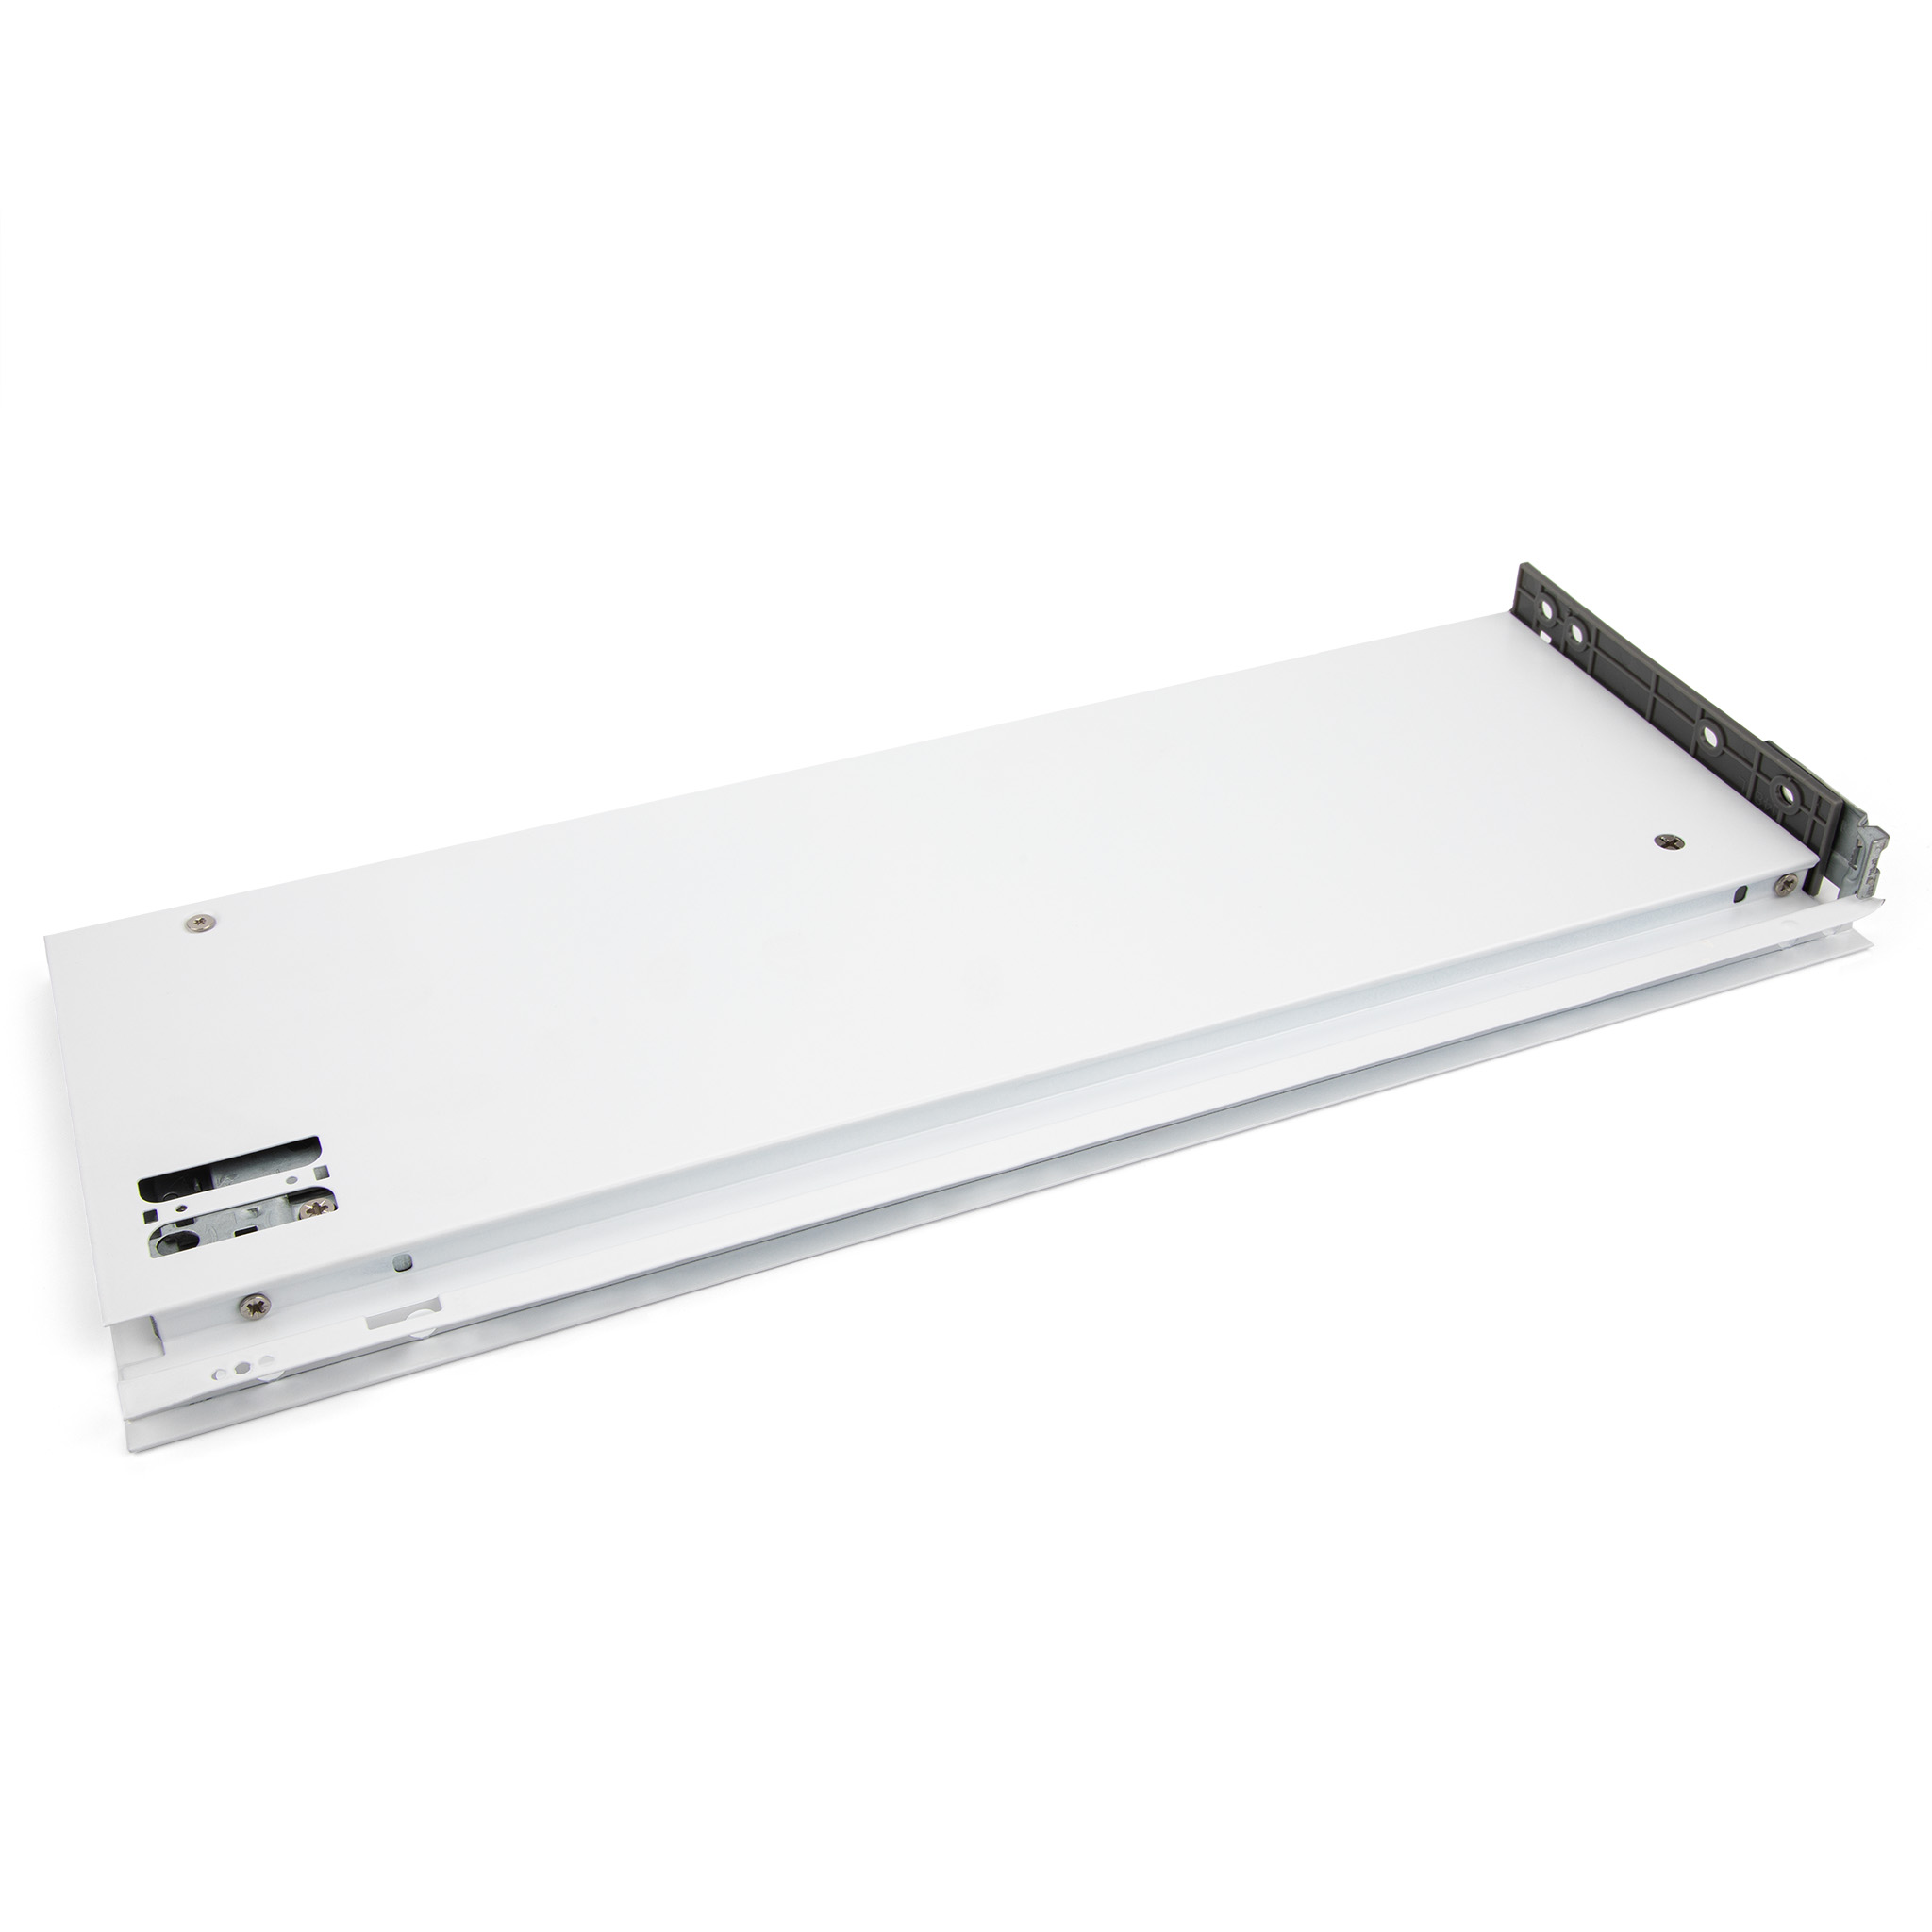 M-Series Fusion Side Wall, 500mm Length, 172mm Height, Lunar White